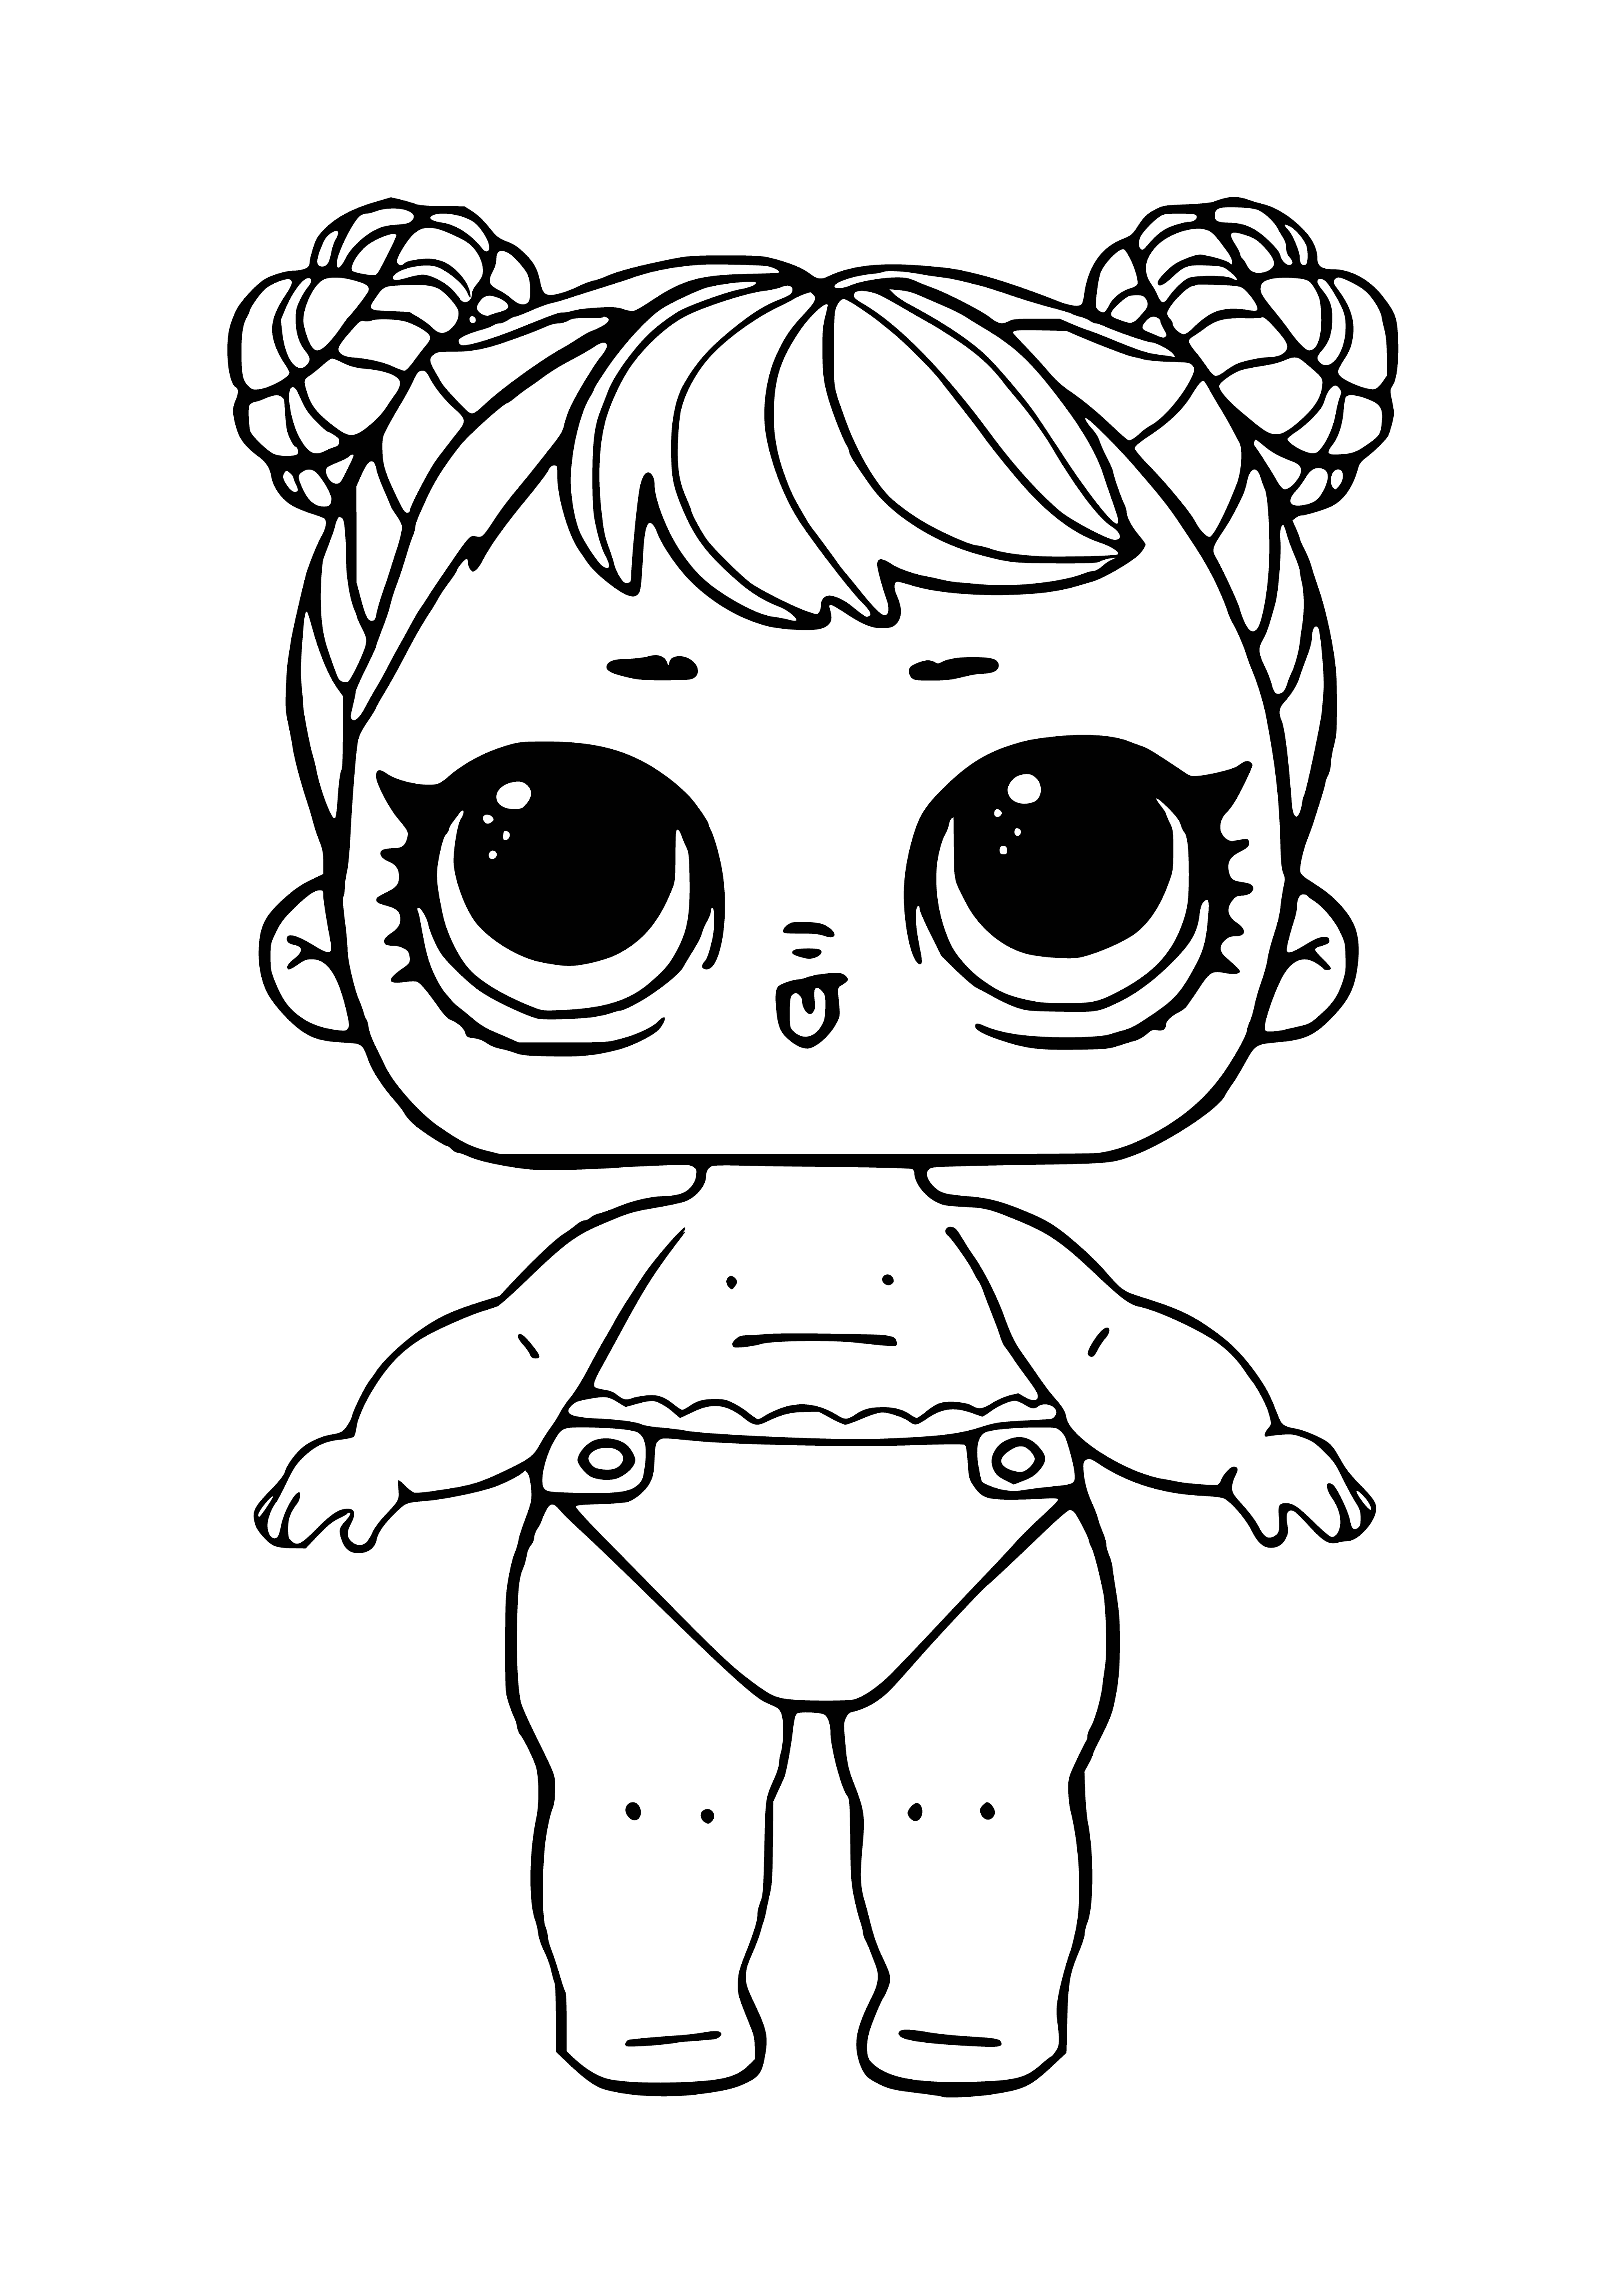 LOL baby Dawn coloring page